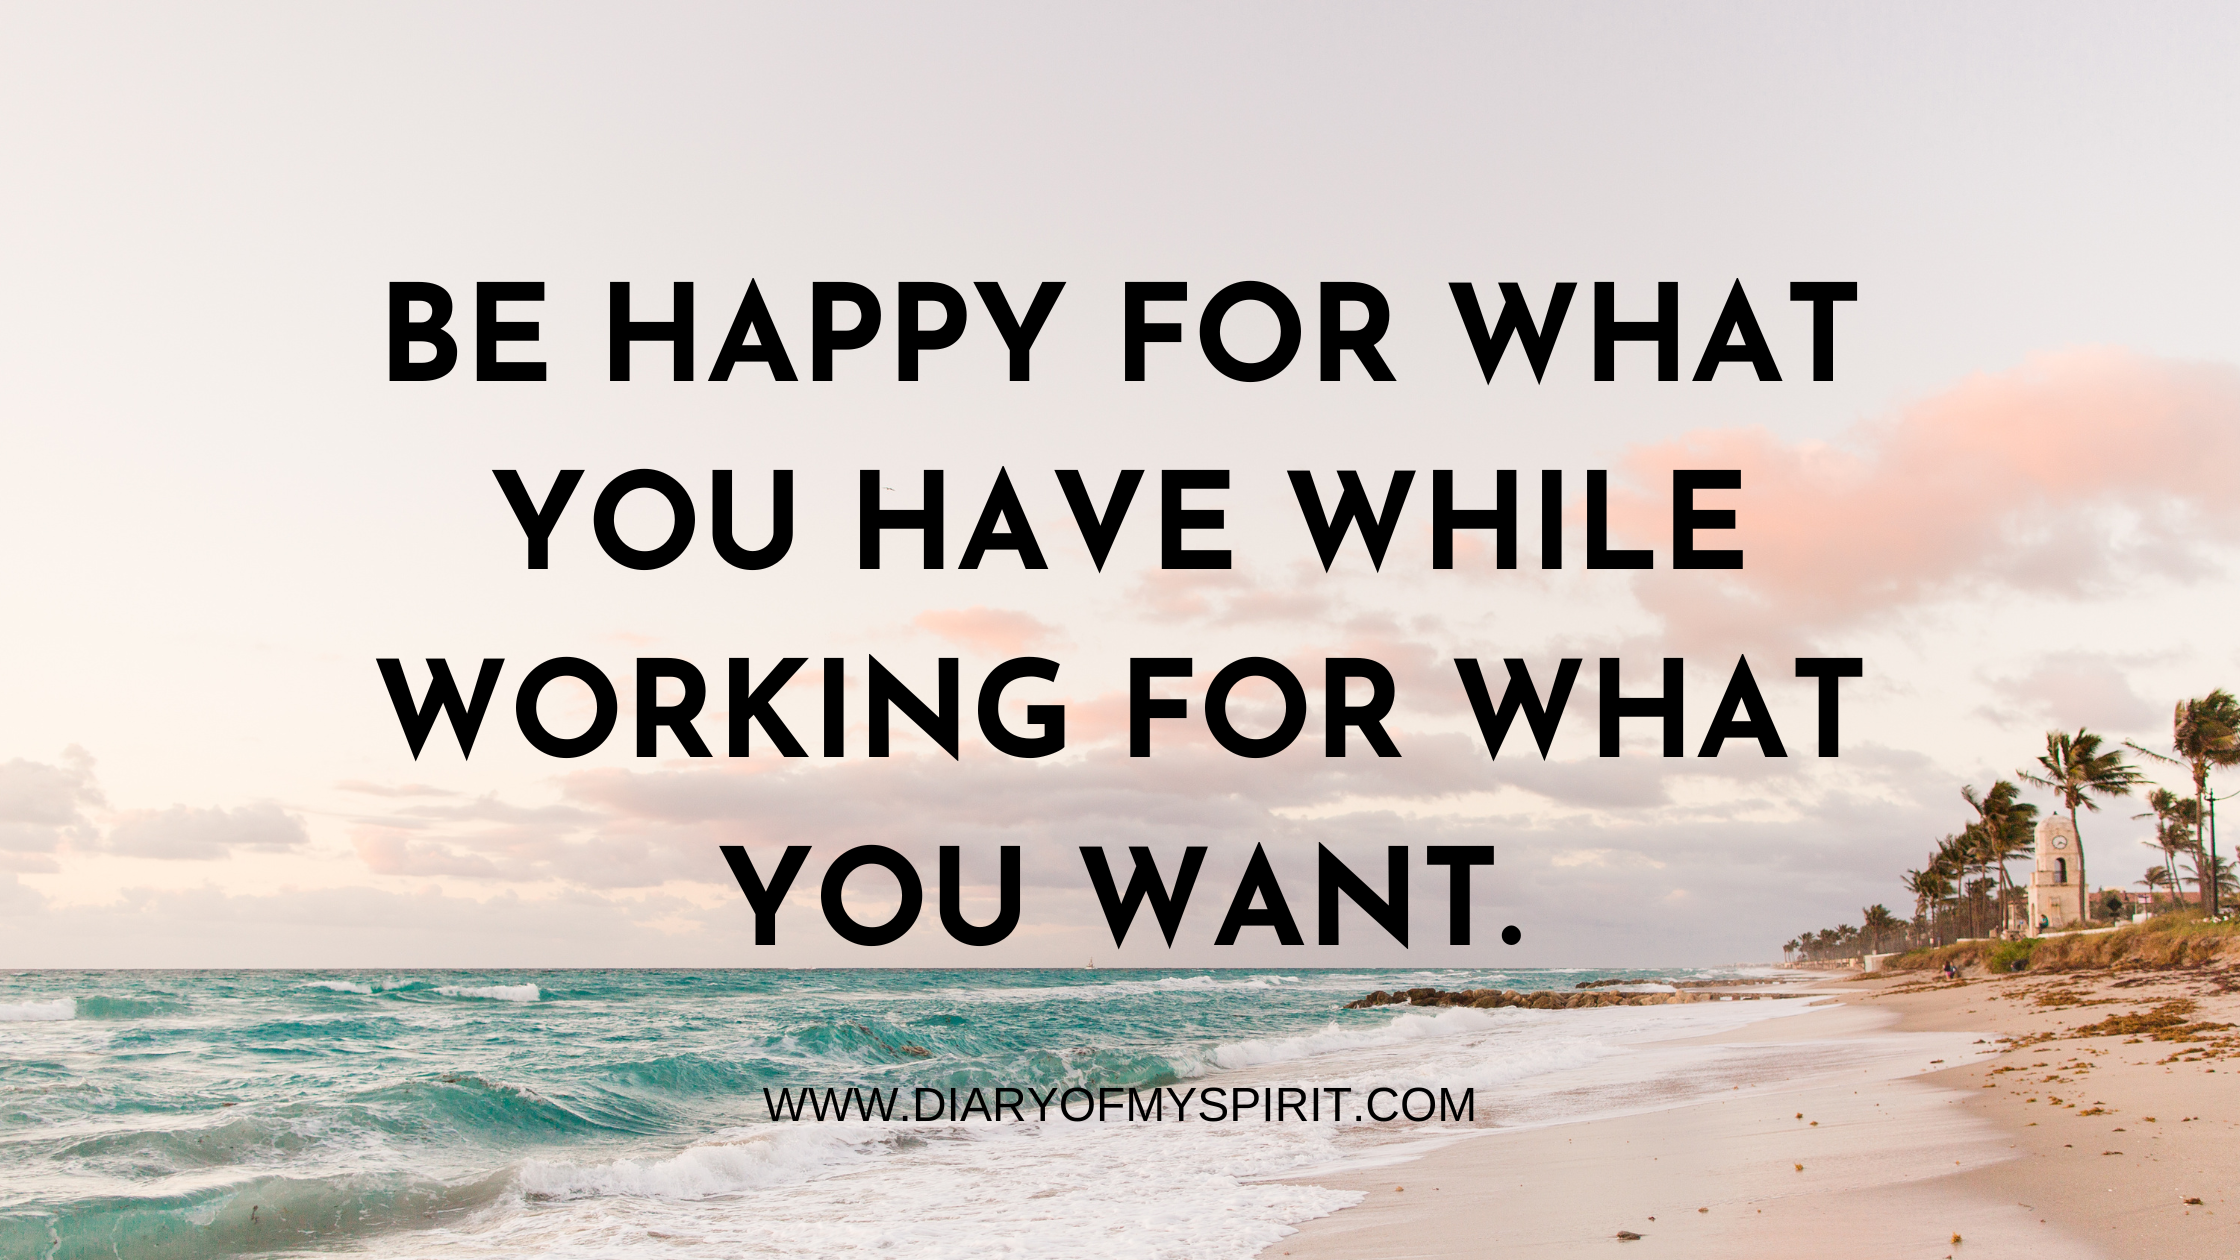 Be happy for what you have while working for what you want. life mottos to live by. life motto. life mottos. motto quote. mottos in life. mottos about life. mottos for life. motto life. motto in life. motto to live by. life's mottos. mottos examples. motto quotes. motto examples. examples of motto. personal motto. mottos to live by. good mottos. best mottos. personal mottos.